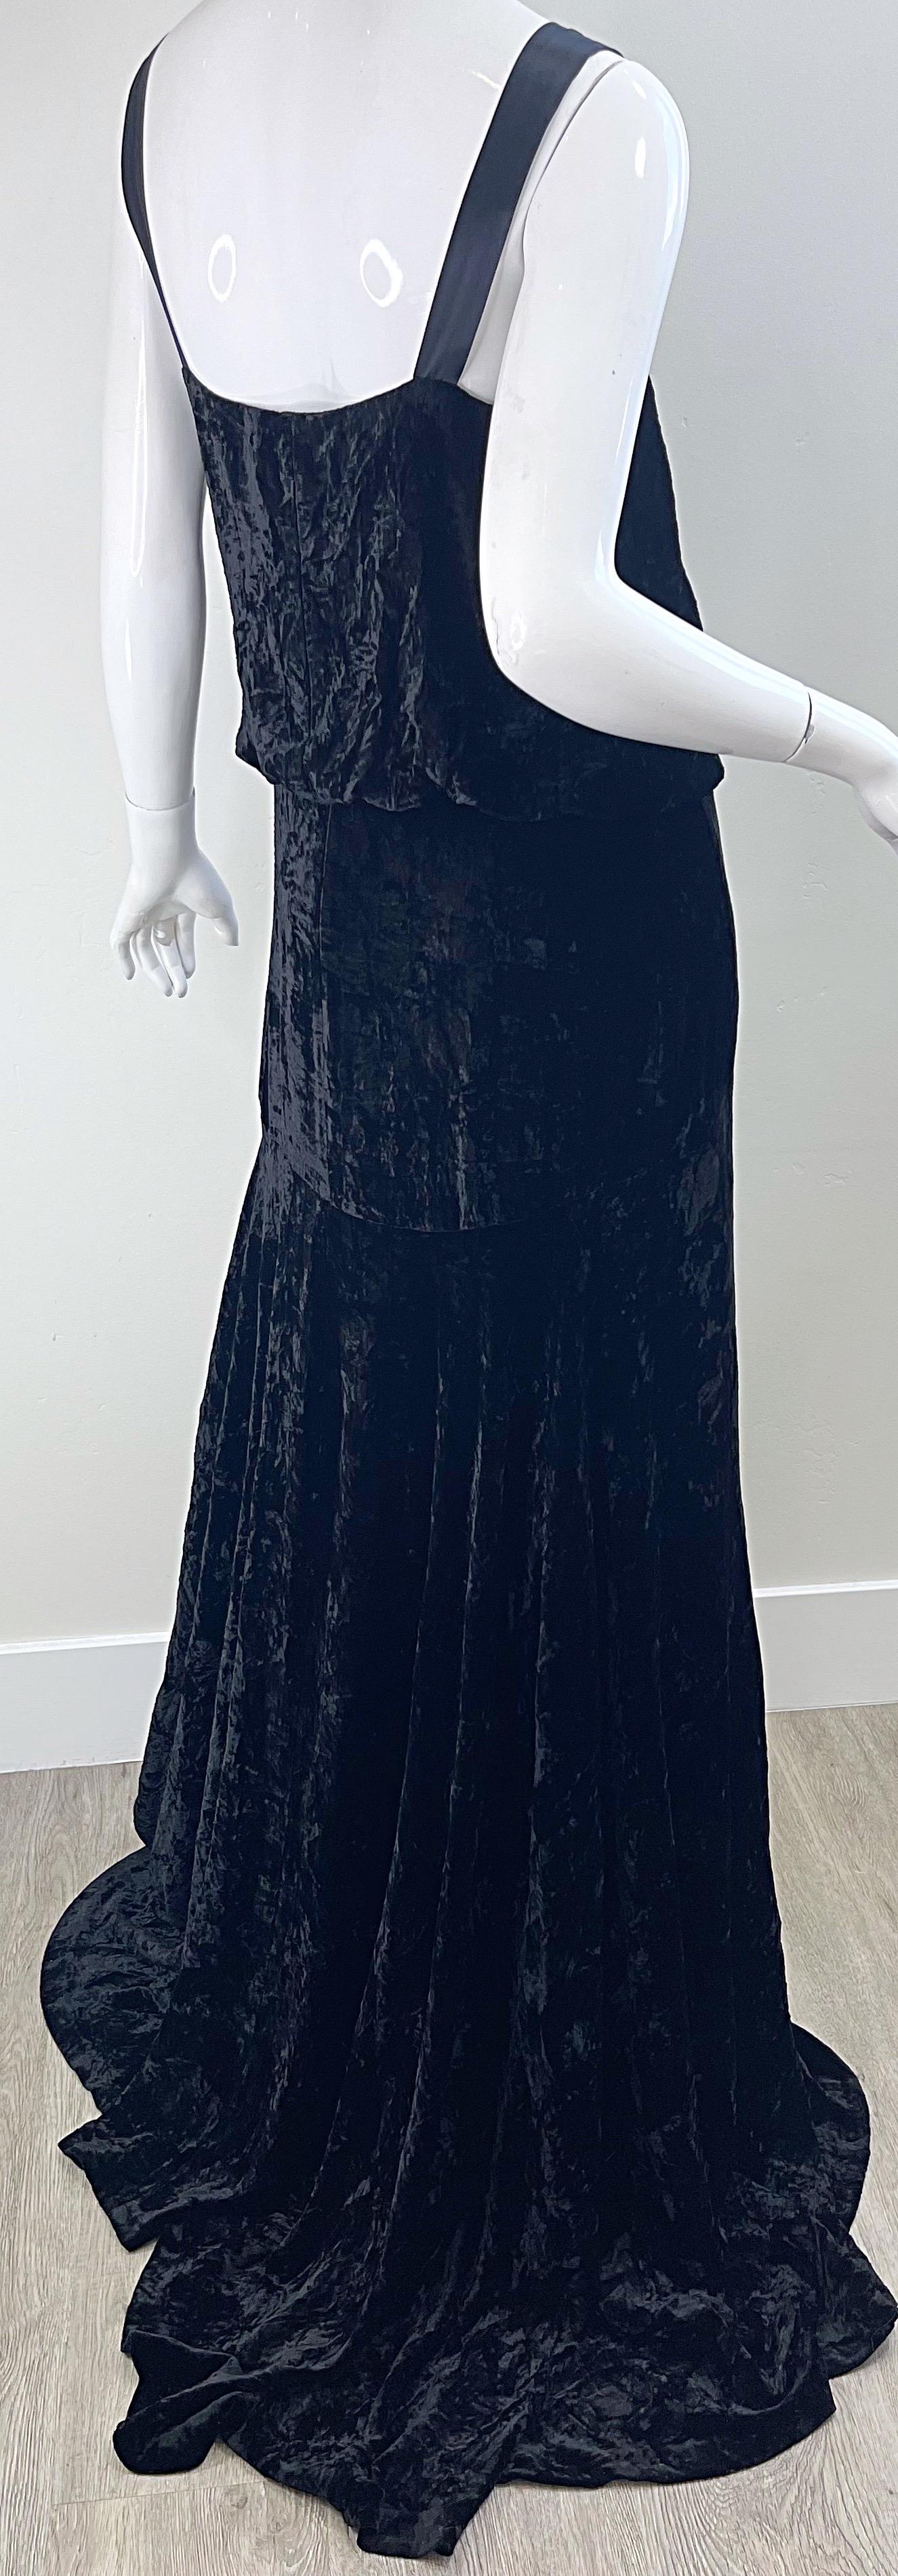 NWT Michael Kors Collection Fall 2006 Runway Size 6-8 Black Crushed Velvet Gown For Sale 2